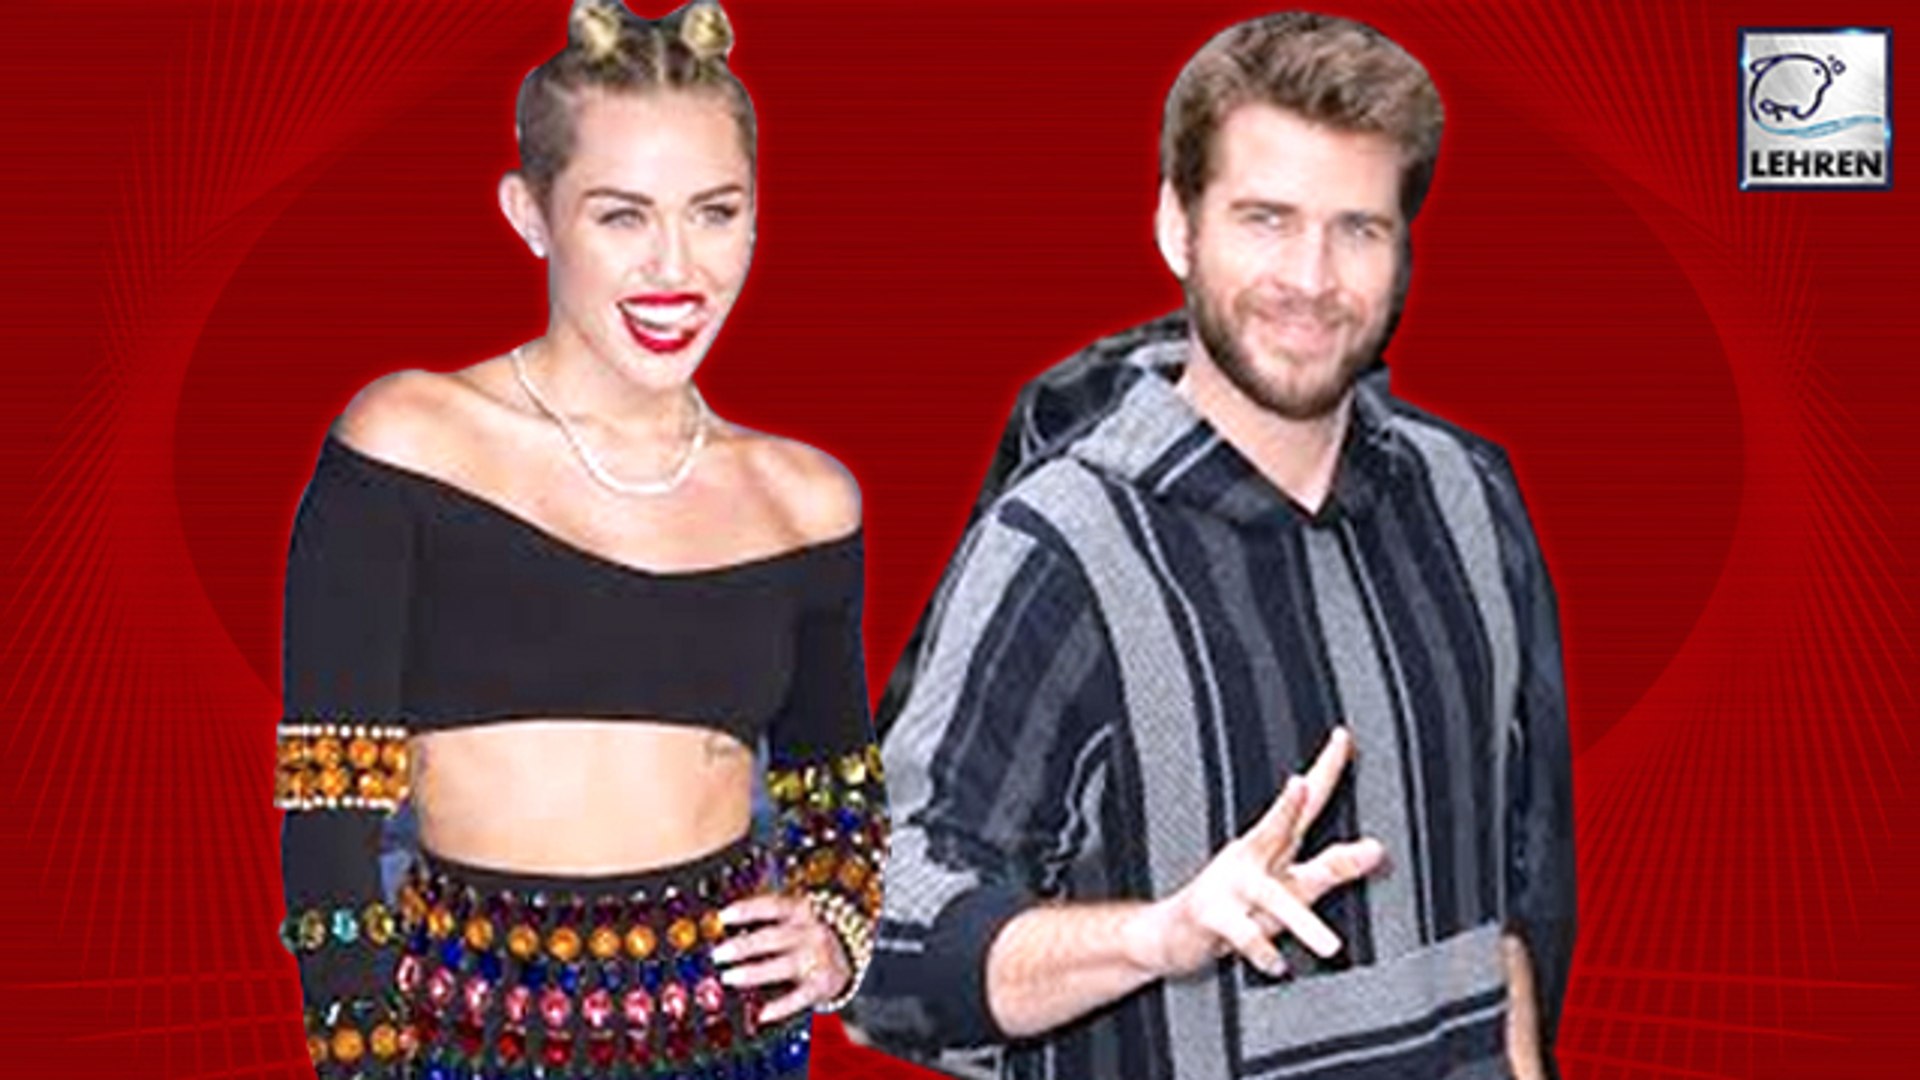 Miley & Liam's Split Gets Ugly, Sources Claim Cheating & Wild Partying!